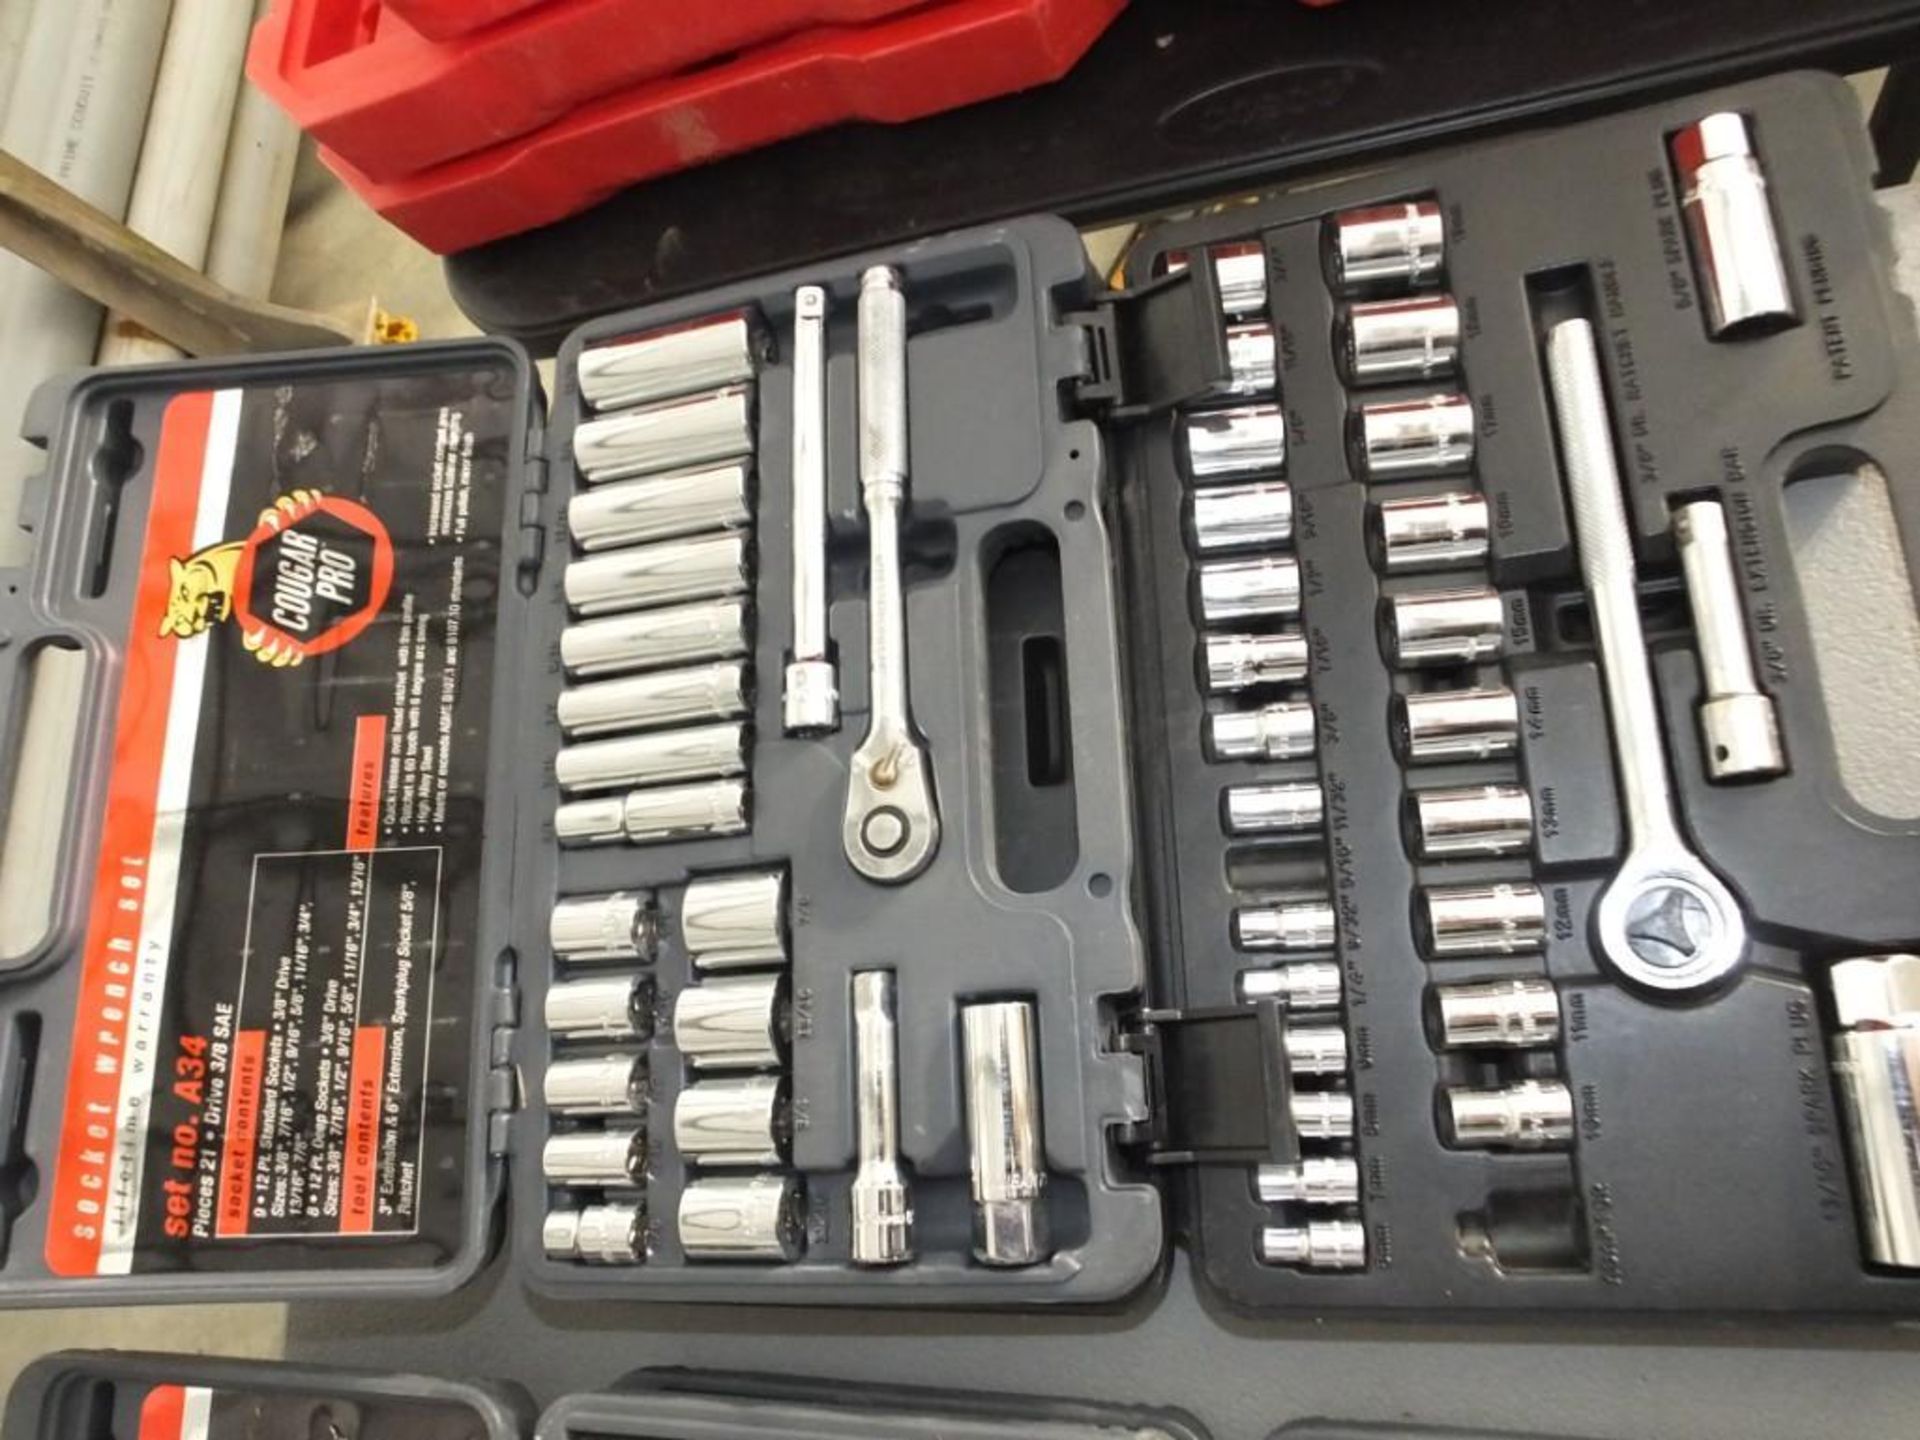 (2) Socket/Wrench Sets: Cougar Pro 3/8 and Evercraft